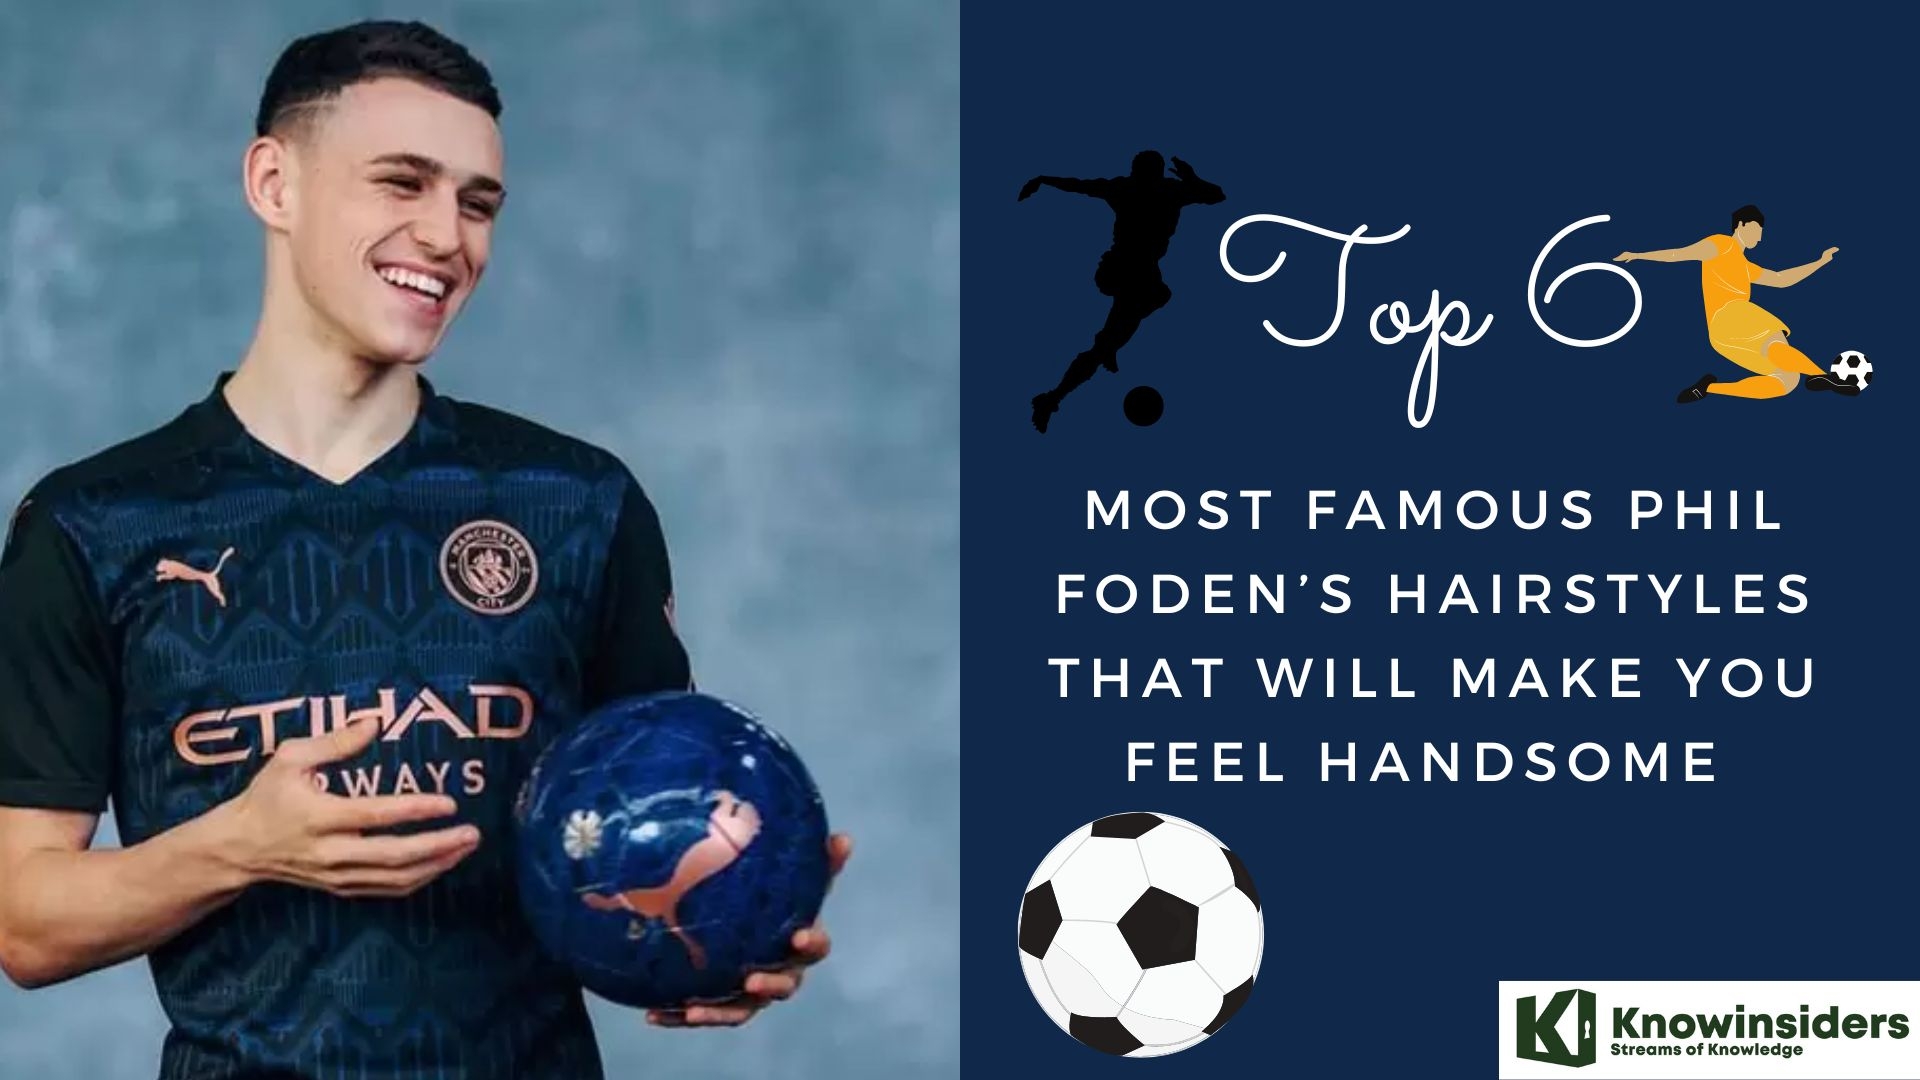 Top 6 Hottest Phil Foden’s Hairstyles That Make You Look Special